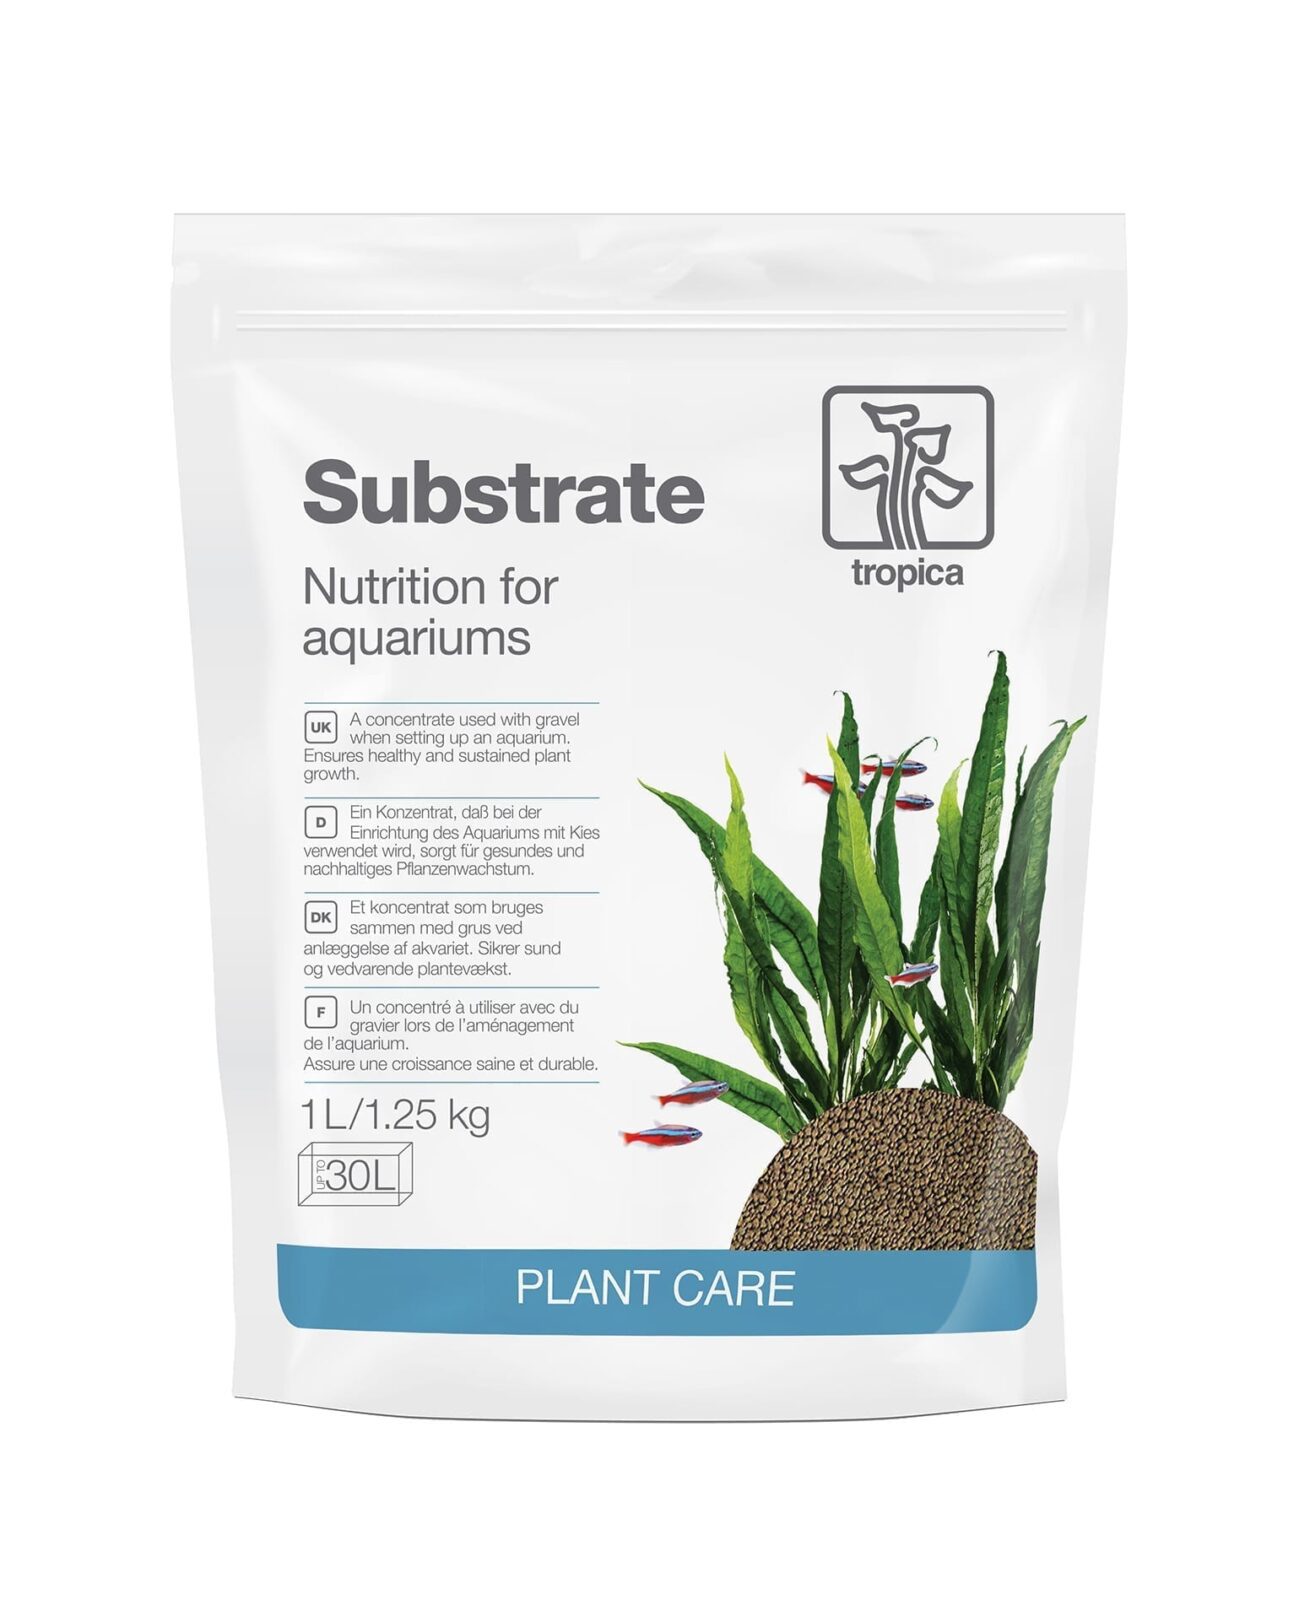 TropicaLSubstrate